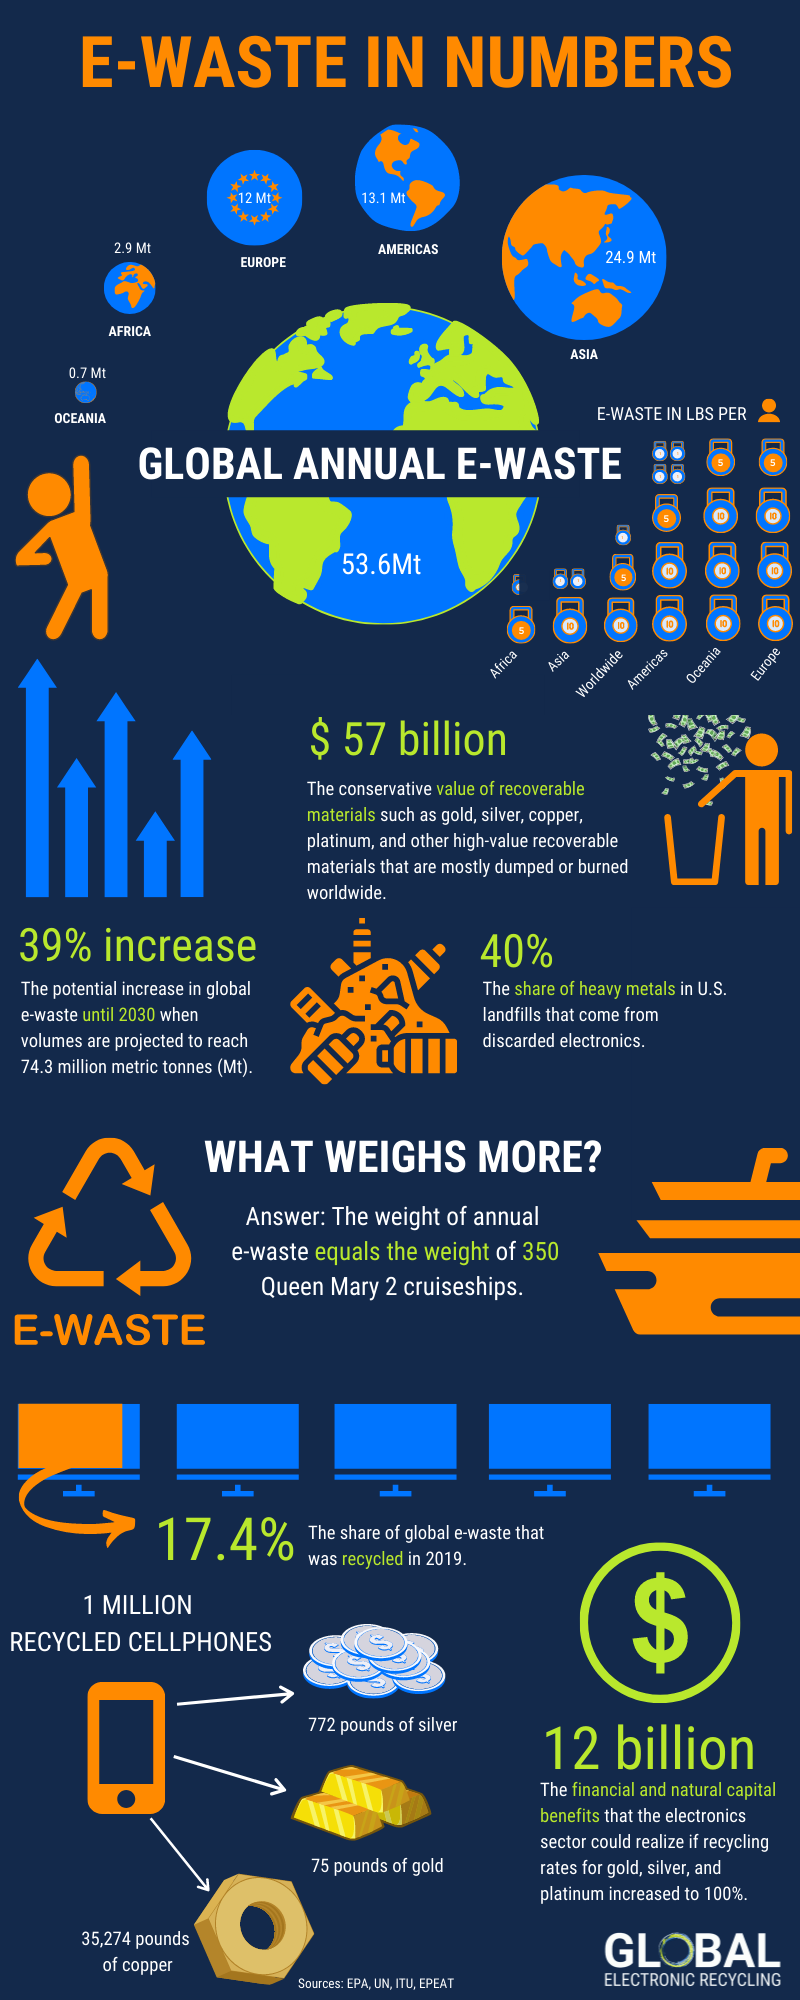 Ewaste statistics prove your company can make a difference [infographic]